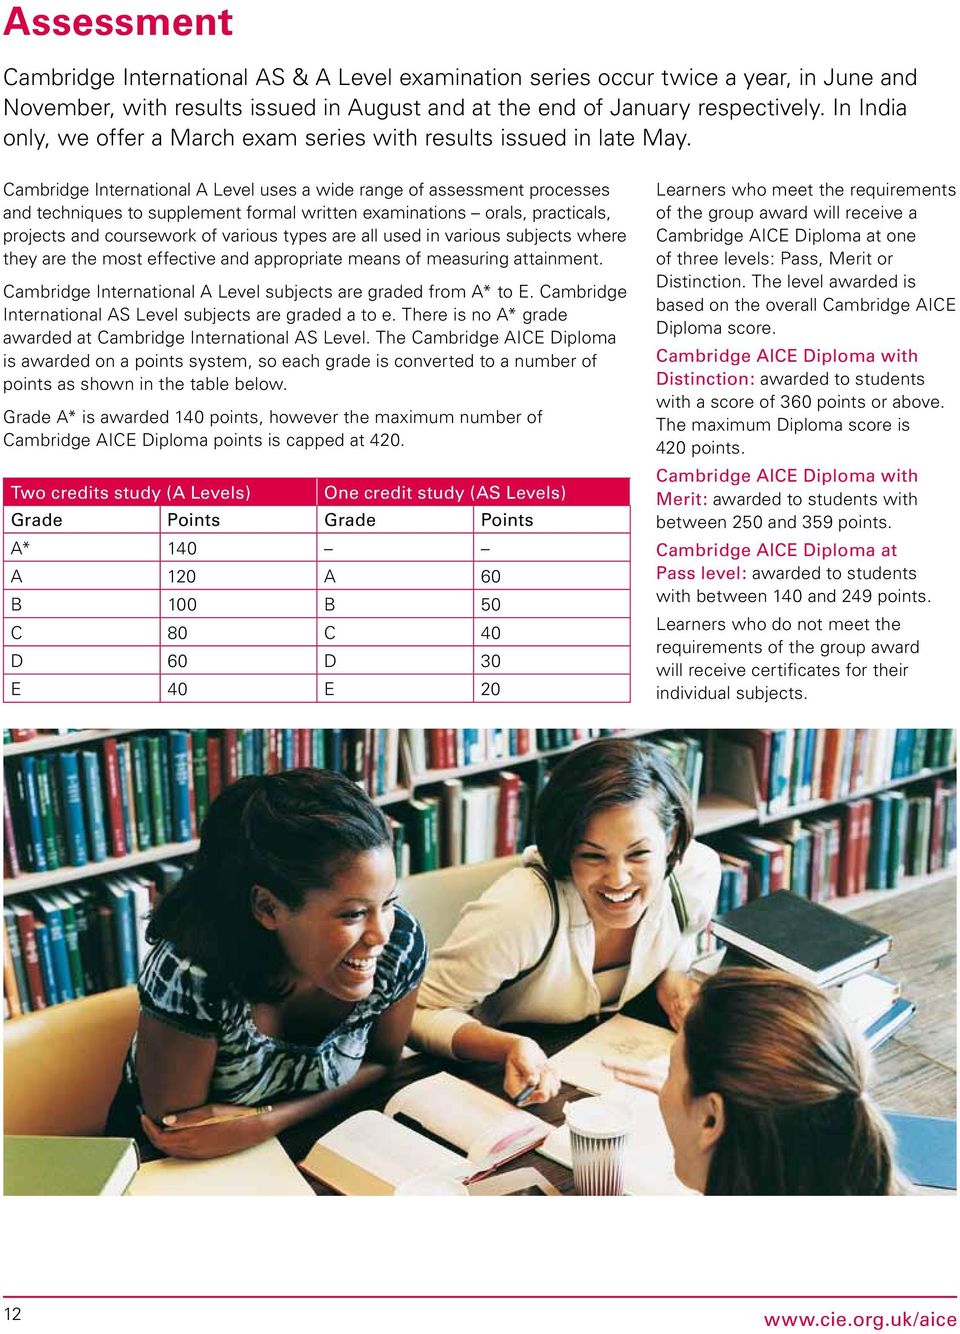 Cambridge International A Level uses a wide range of assessment processes and techniques to supplement formal written examinations orals, practicals, projects and coursework of various types are all